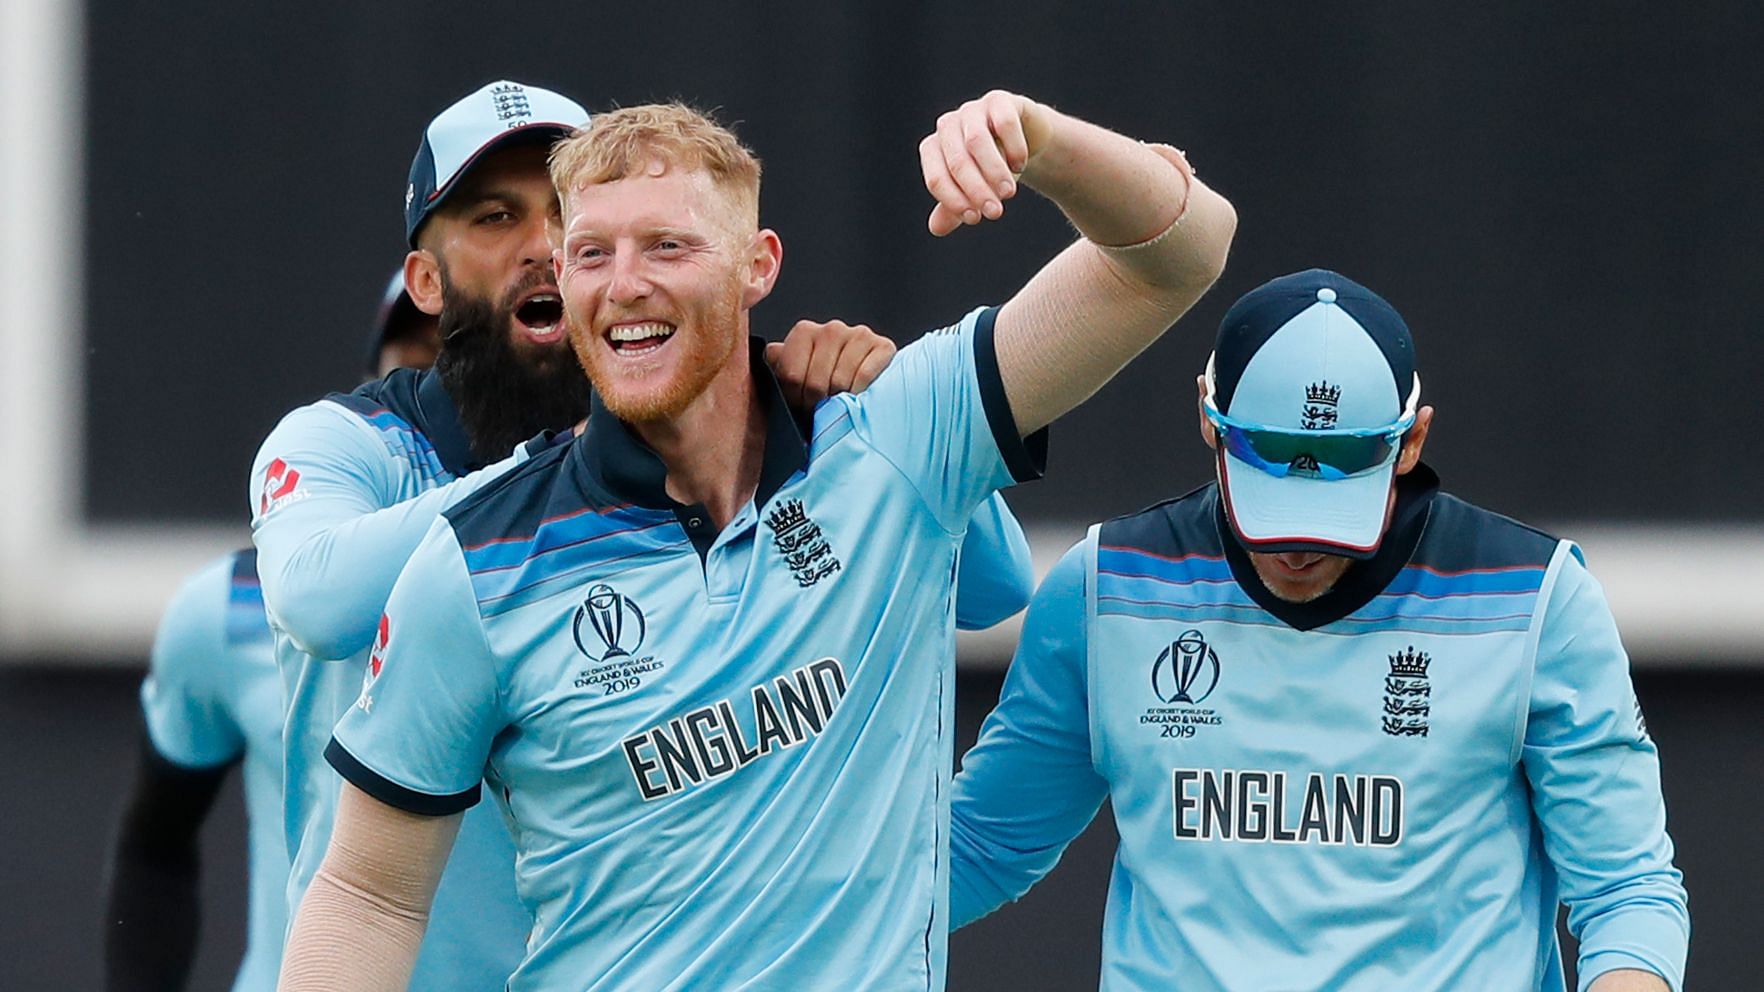 Ben Stokes insists his astonishing catch in England’s World Cup rout of South Africa on Thursday doesn’t rank as the best of his career.